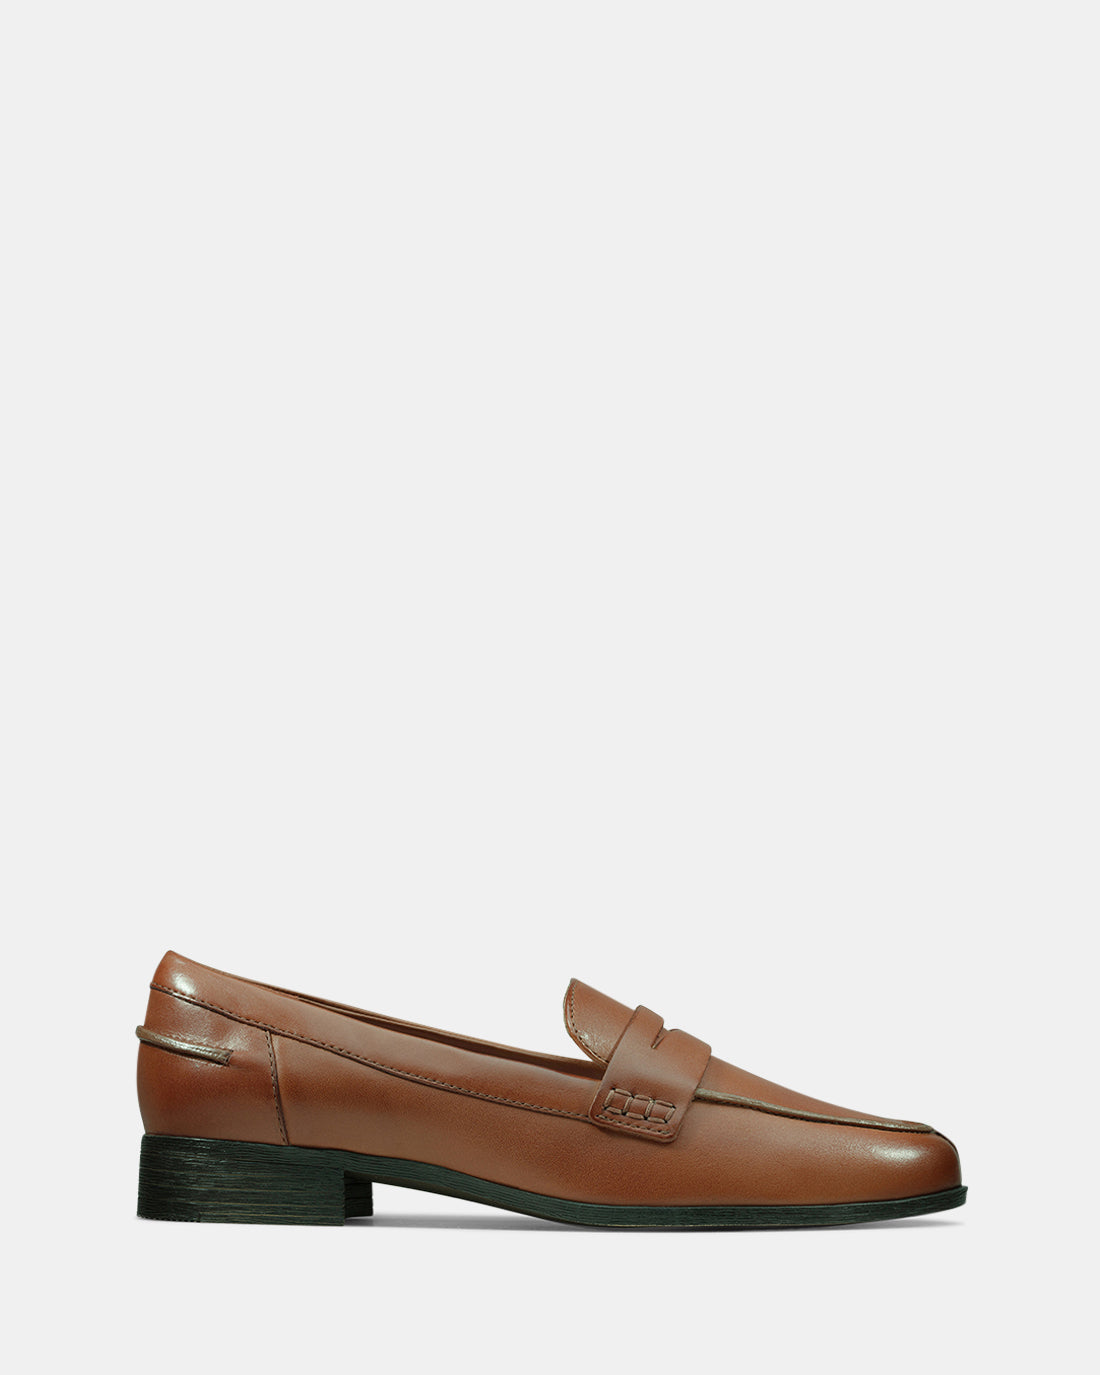 Hamble Loafer Tan Leather